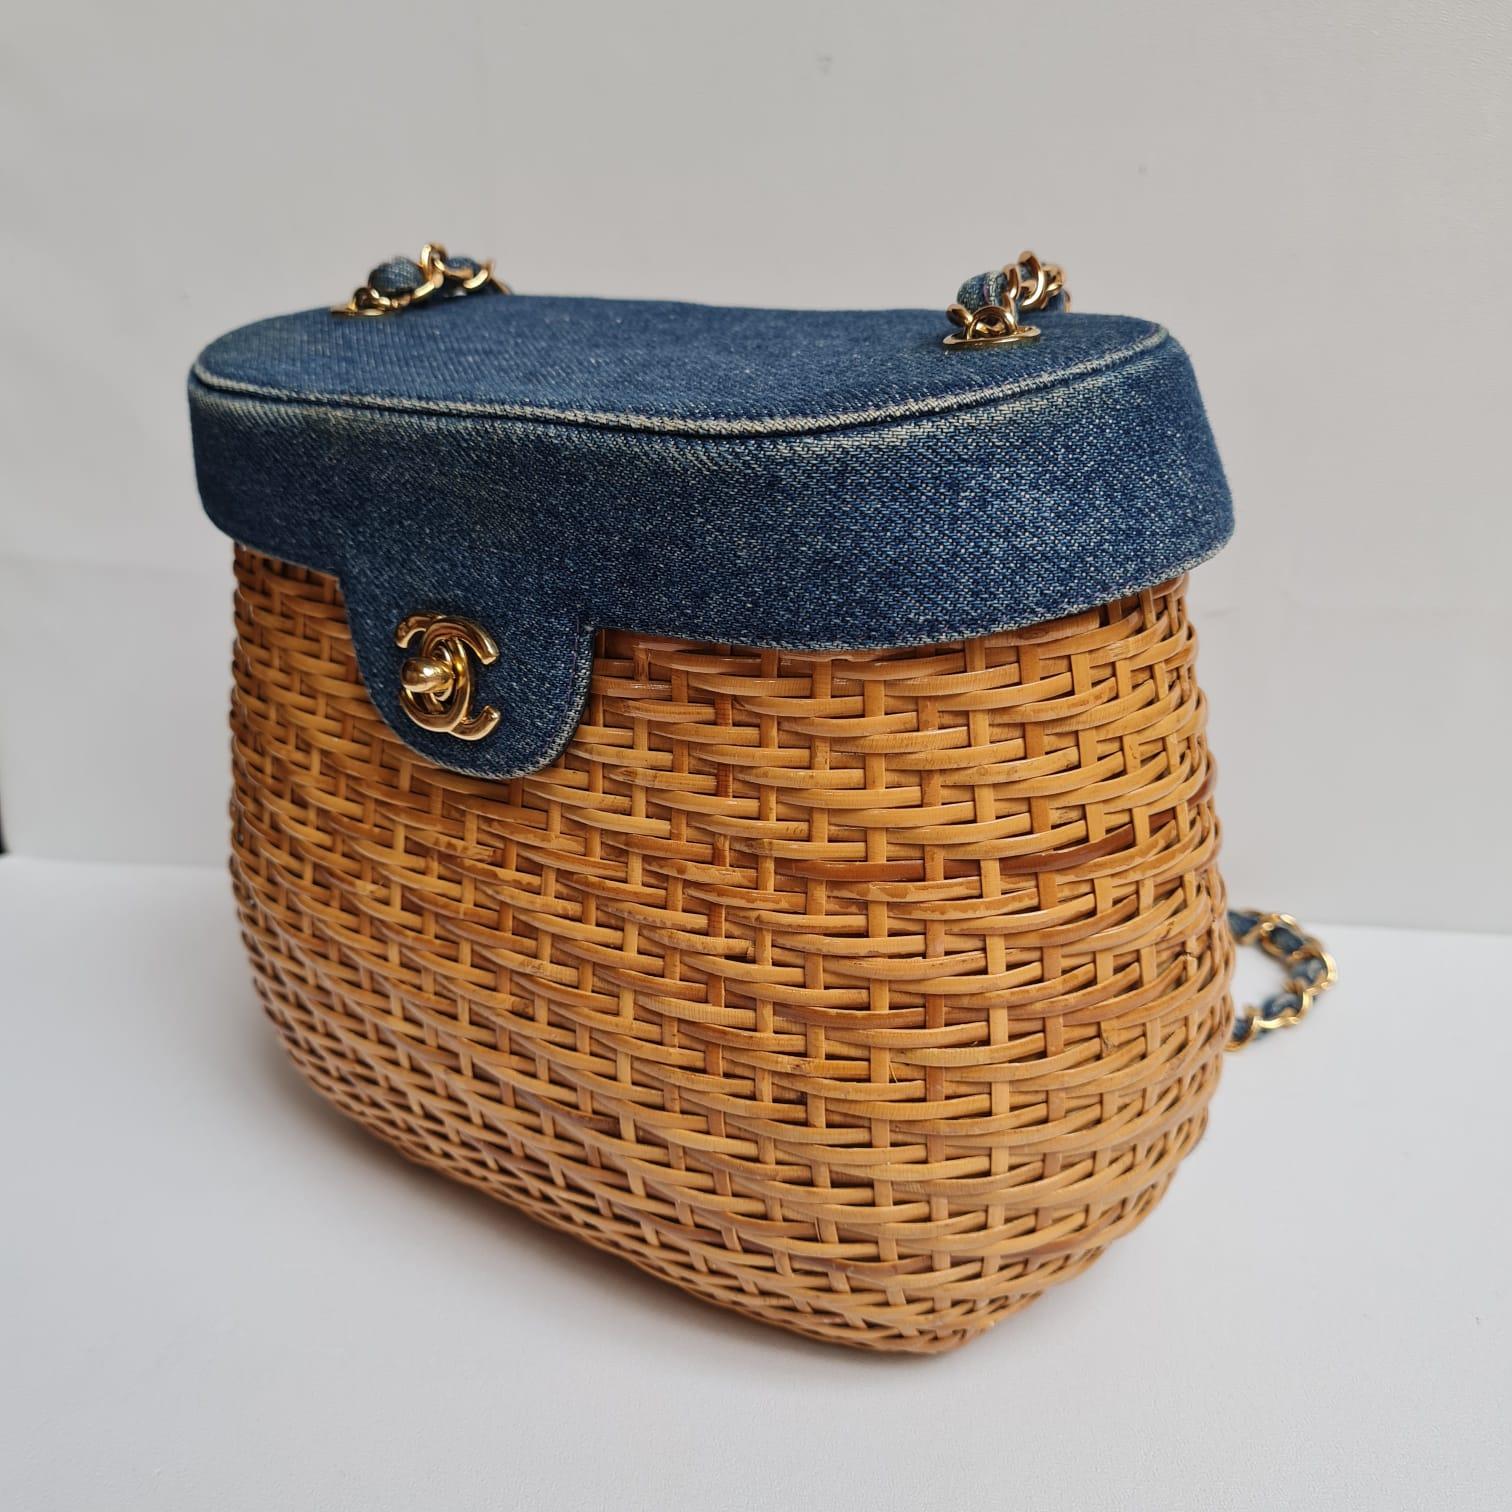 Rare vintage denim rattan shoulder bag.  Visible scratches on the leather lining. Overall in good condition still. Item is series #5. Comes as is.